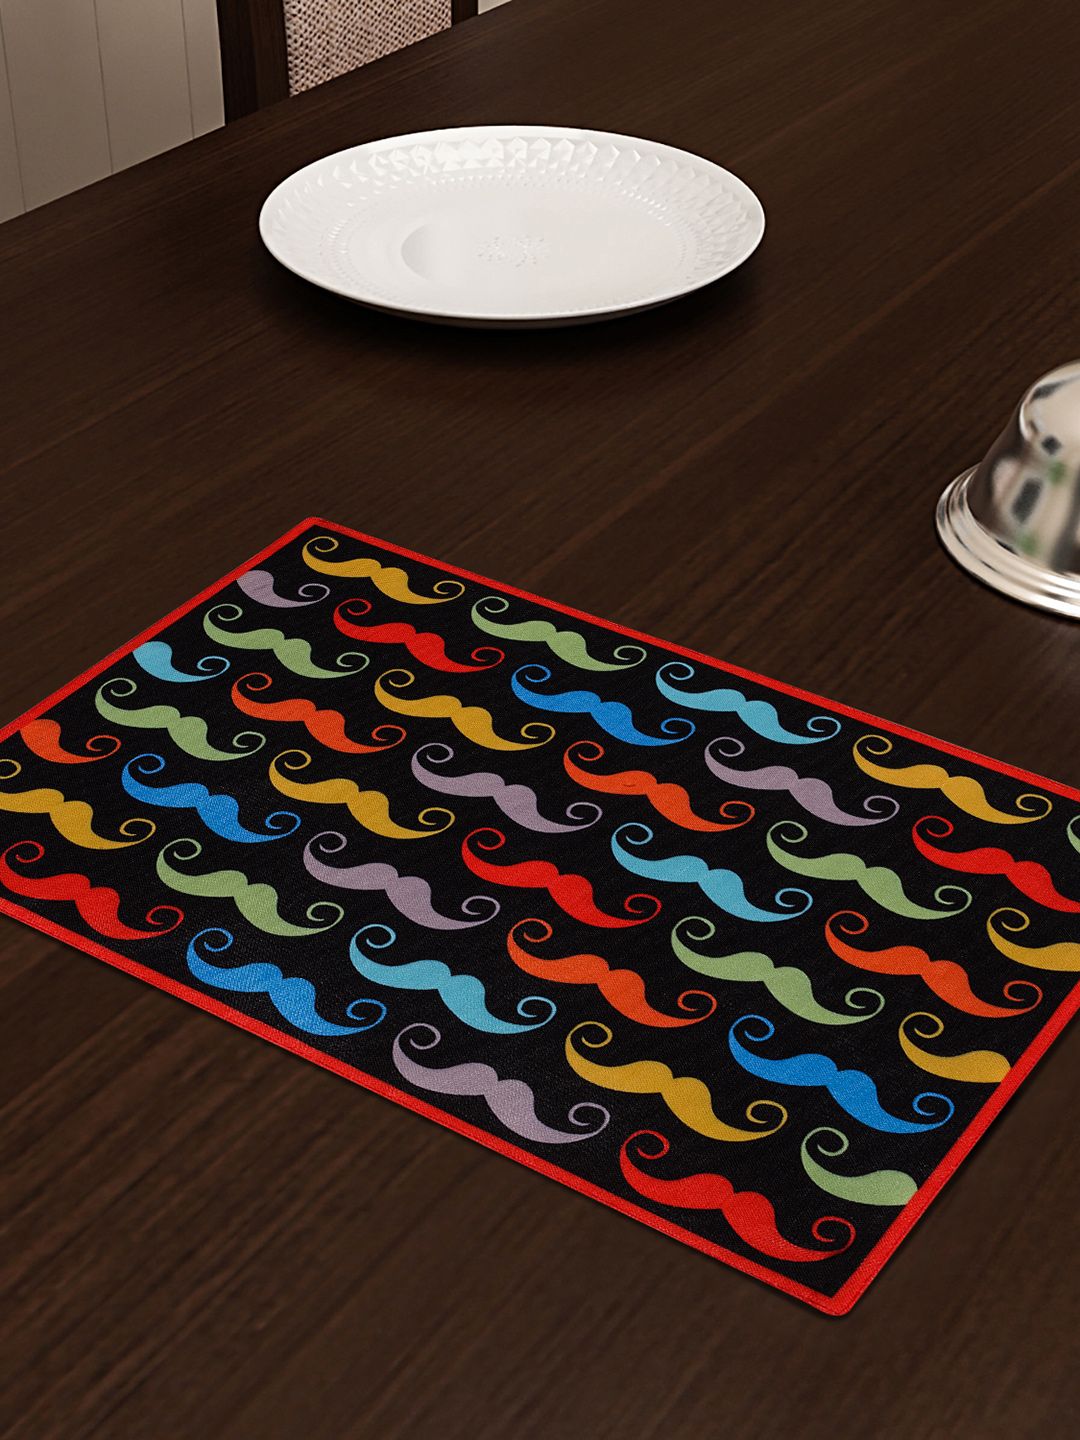 SEJ by Nisha Gupta Black & Blue Set of 6 Printed Table Placemats Price in India